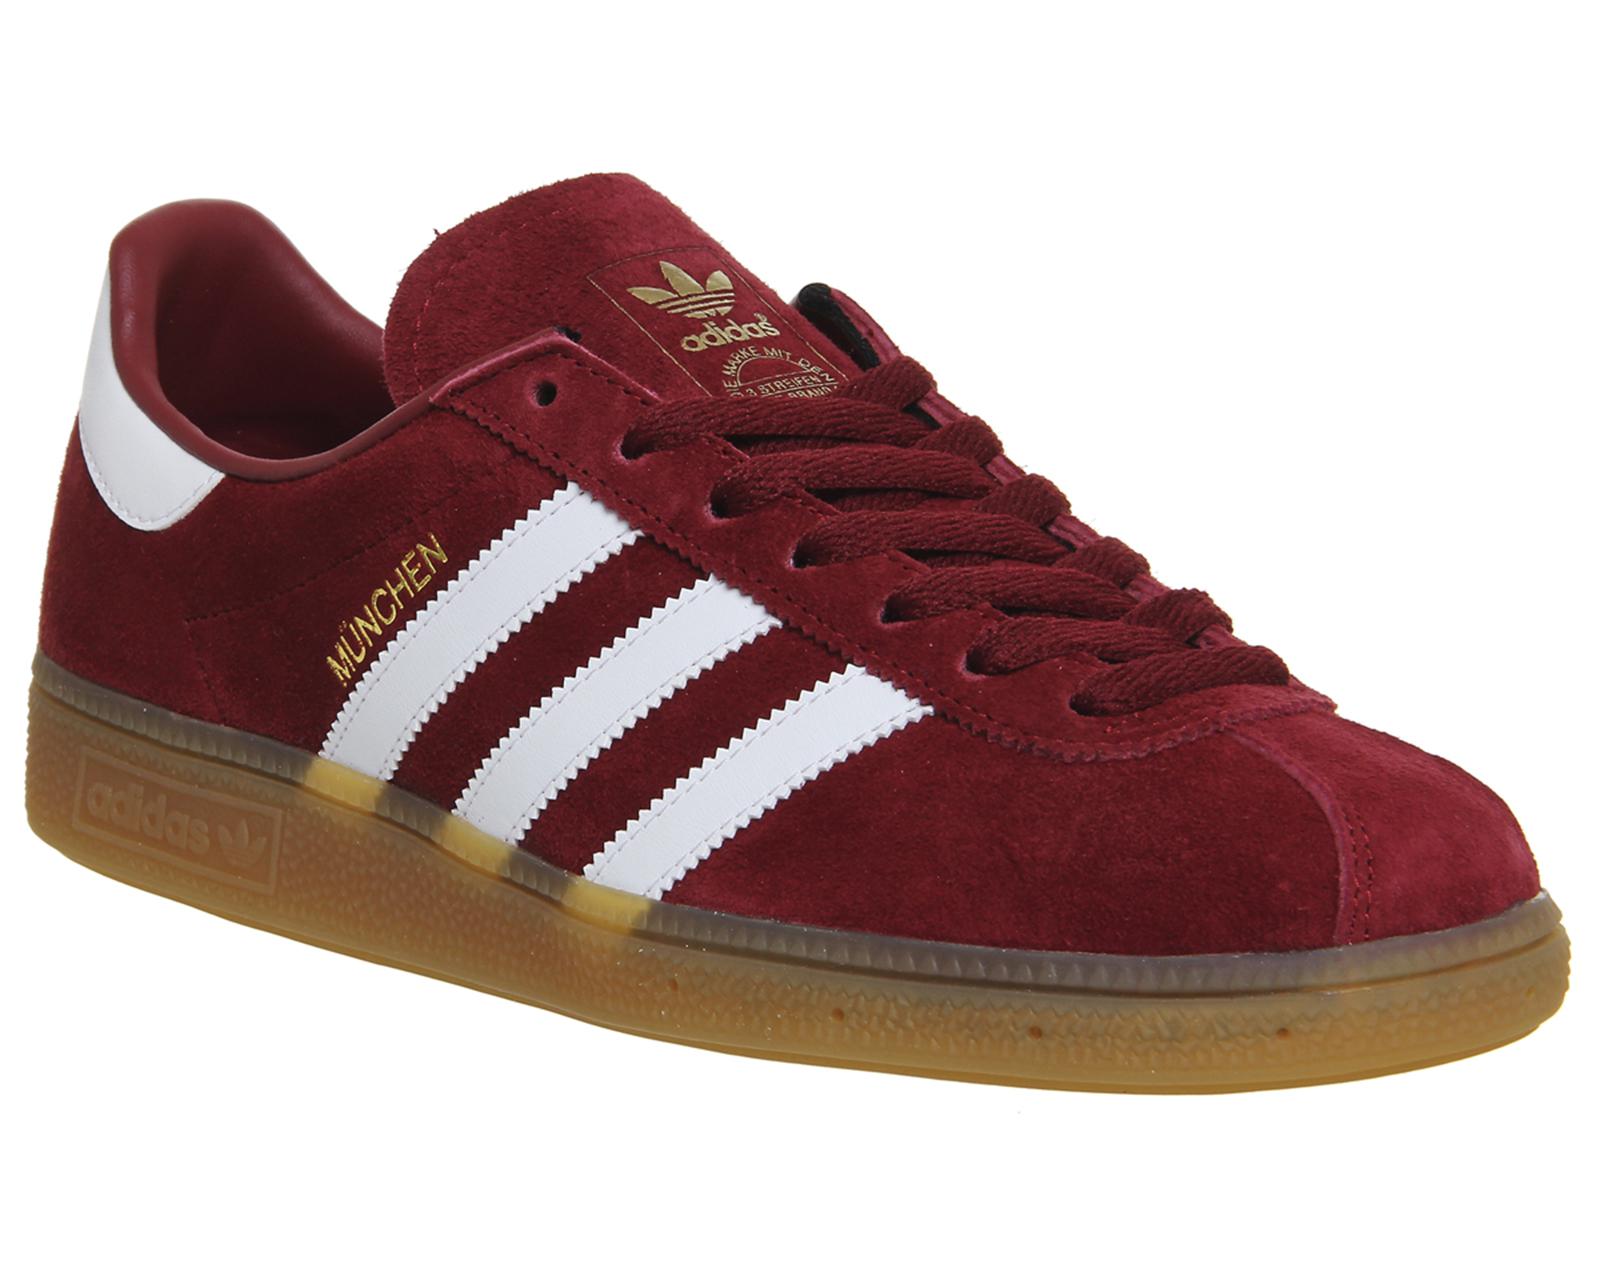 adidas Leather Munchen in Burgundy (Red) for Men - Lyst